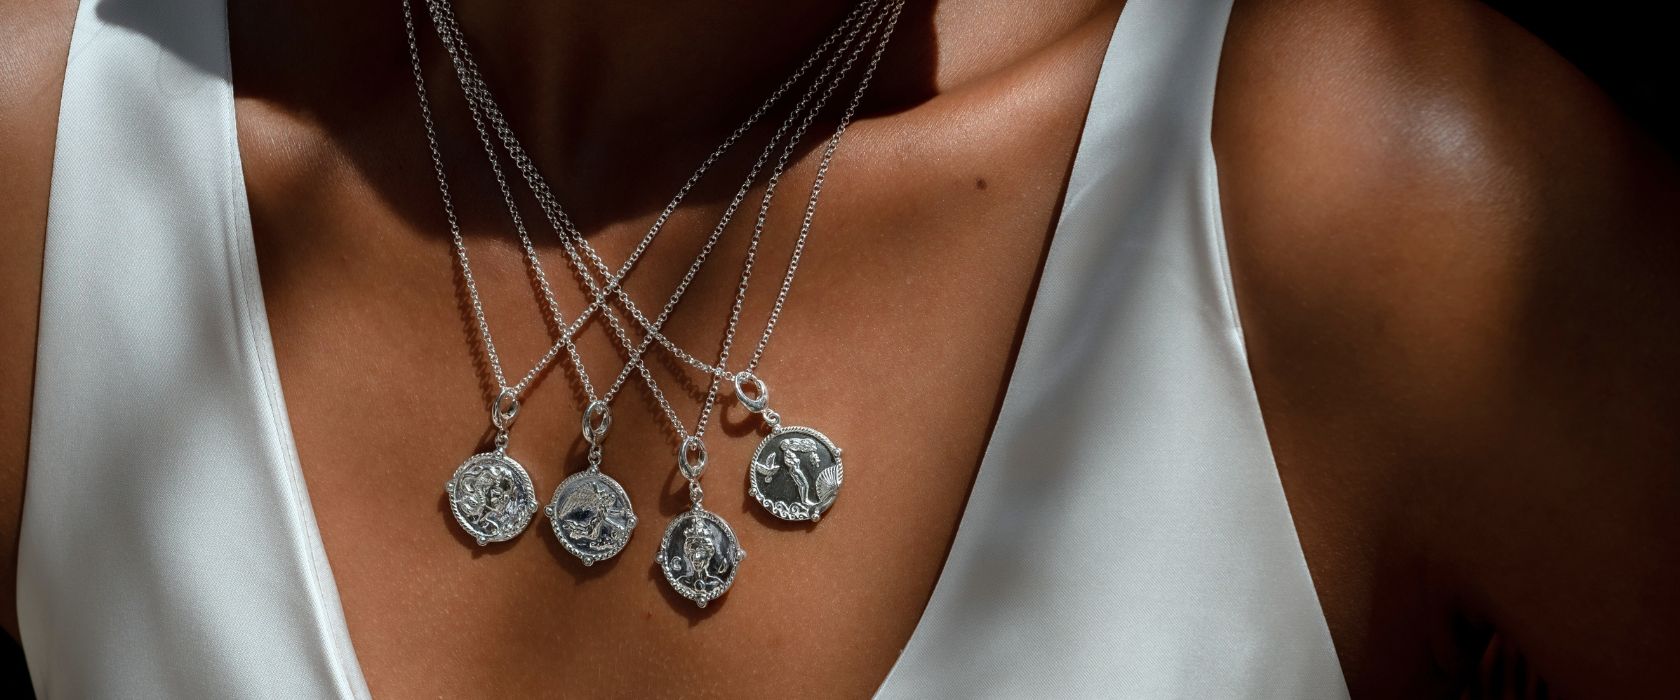 Silver Goddess Charm Necklaces | Goddess Charm Jewellery by Lily Charmed